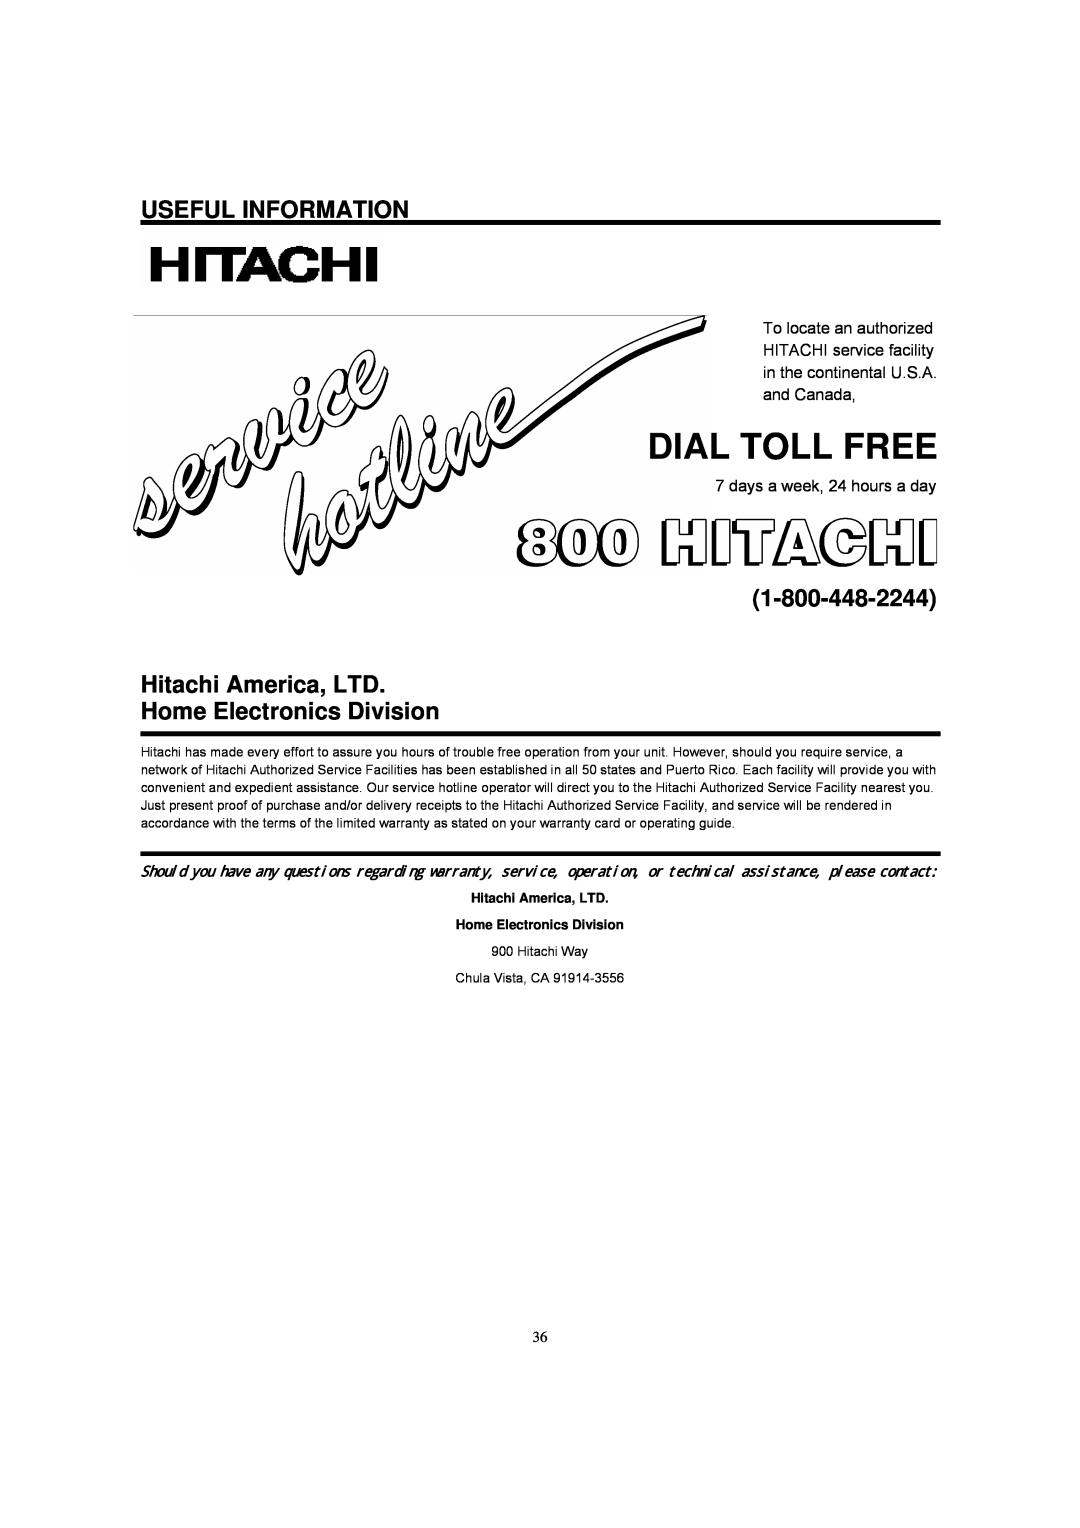 Hitachi 42HDM12A Home Electronics Division, Dial Toll Free, Useful Information, days a week, 24 hours a day 